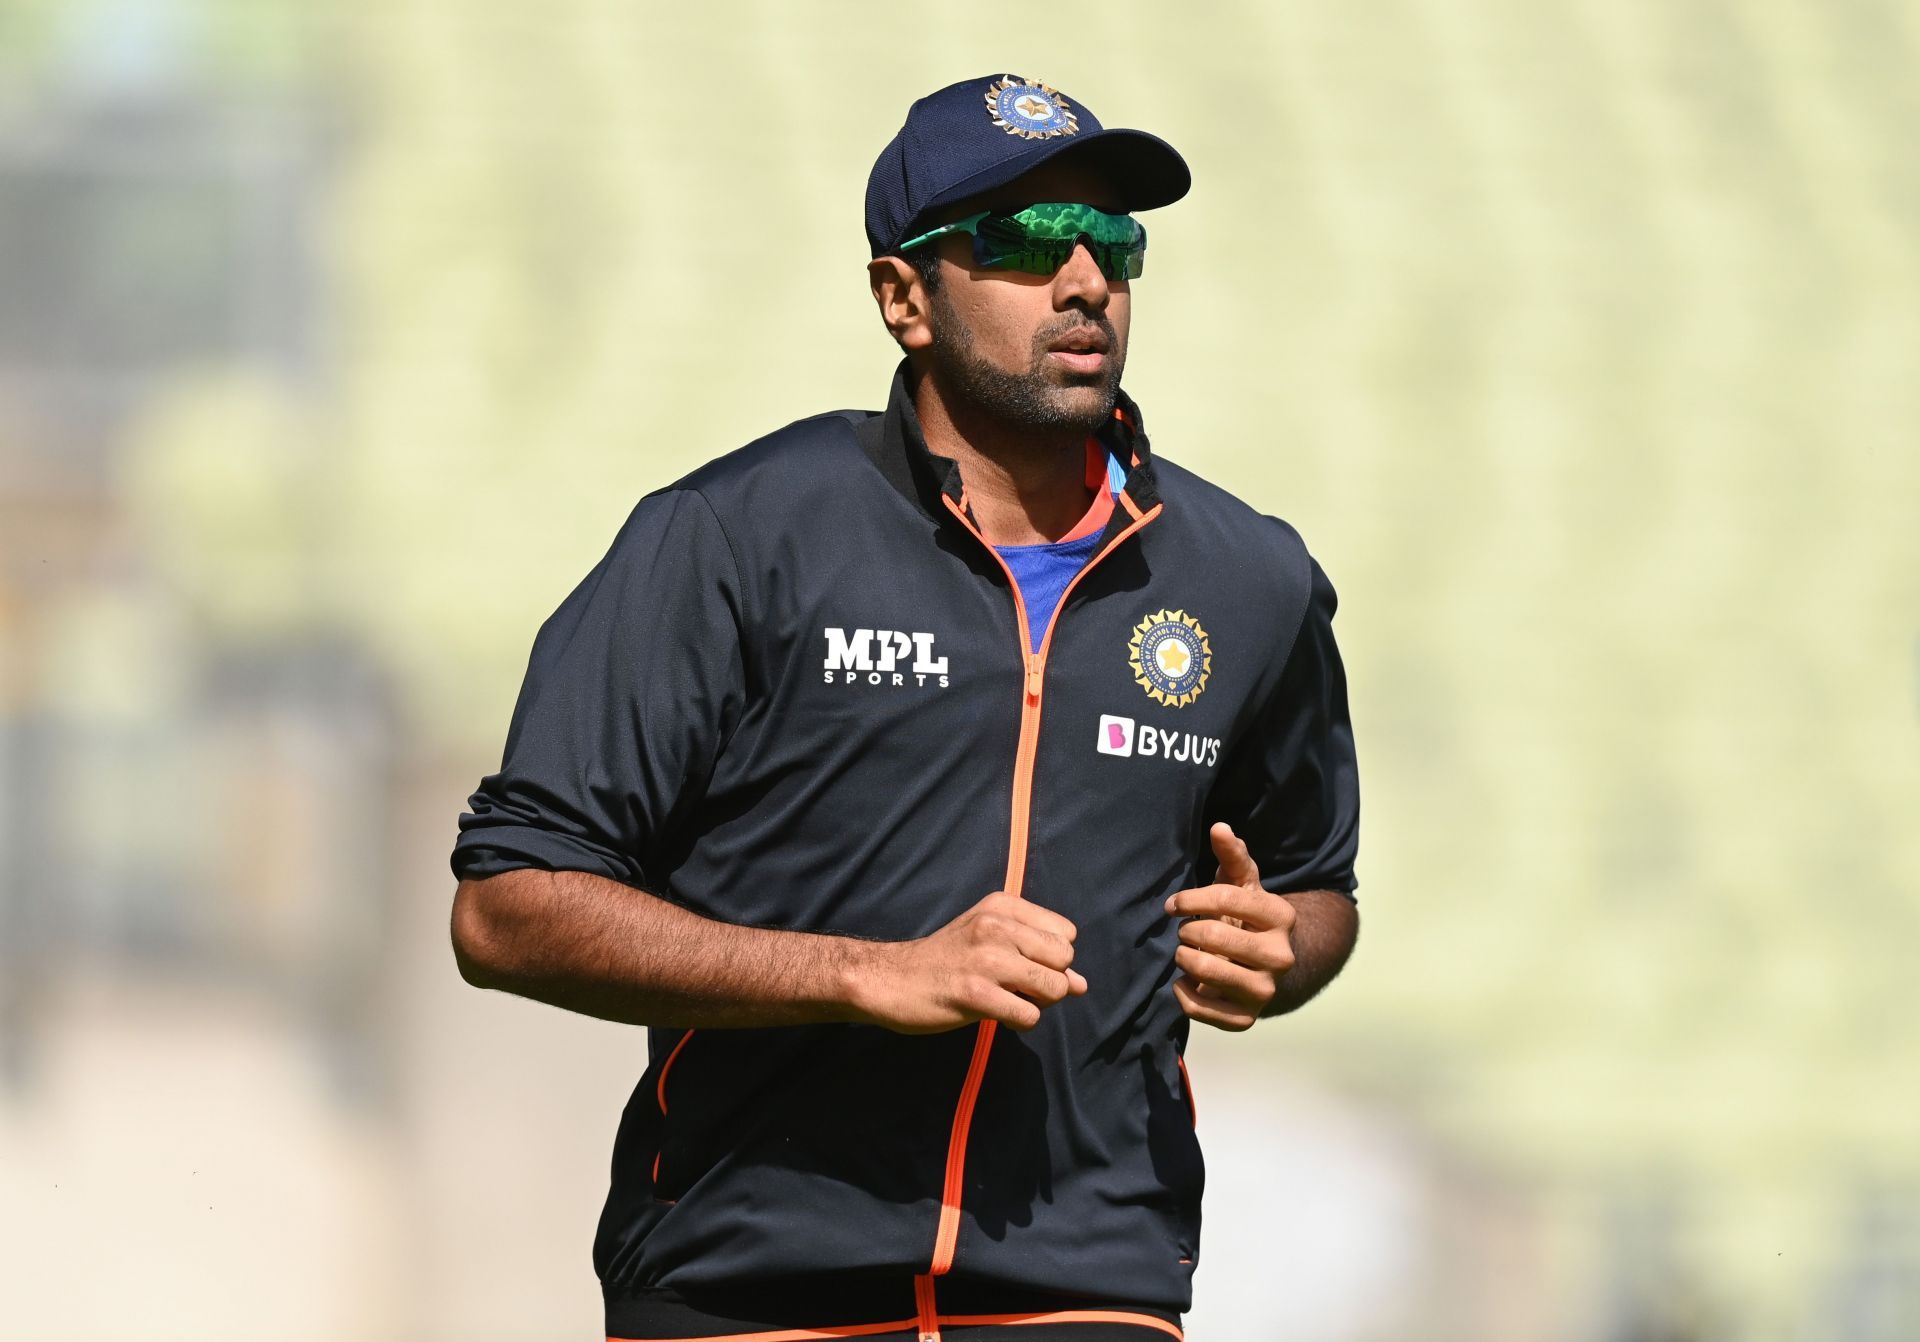 Seasoned pro: Ravichandran Ashwin will be one of the players expected to make the T20 World Cup squad